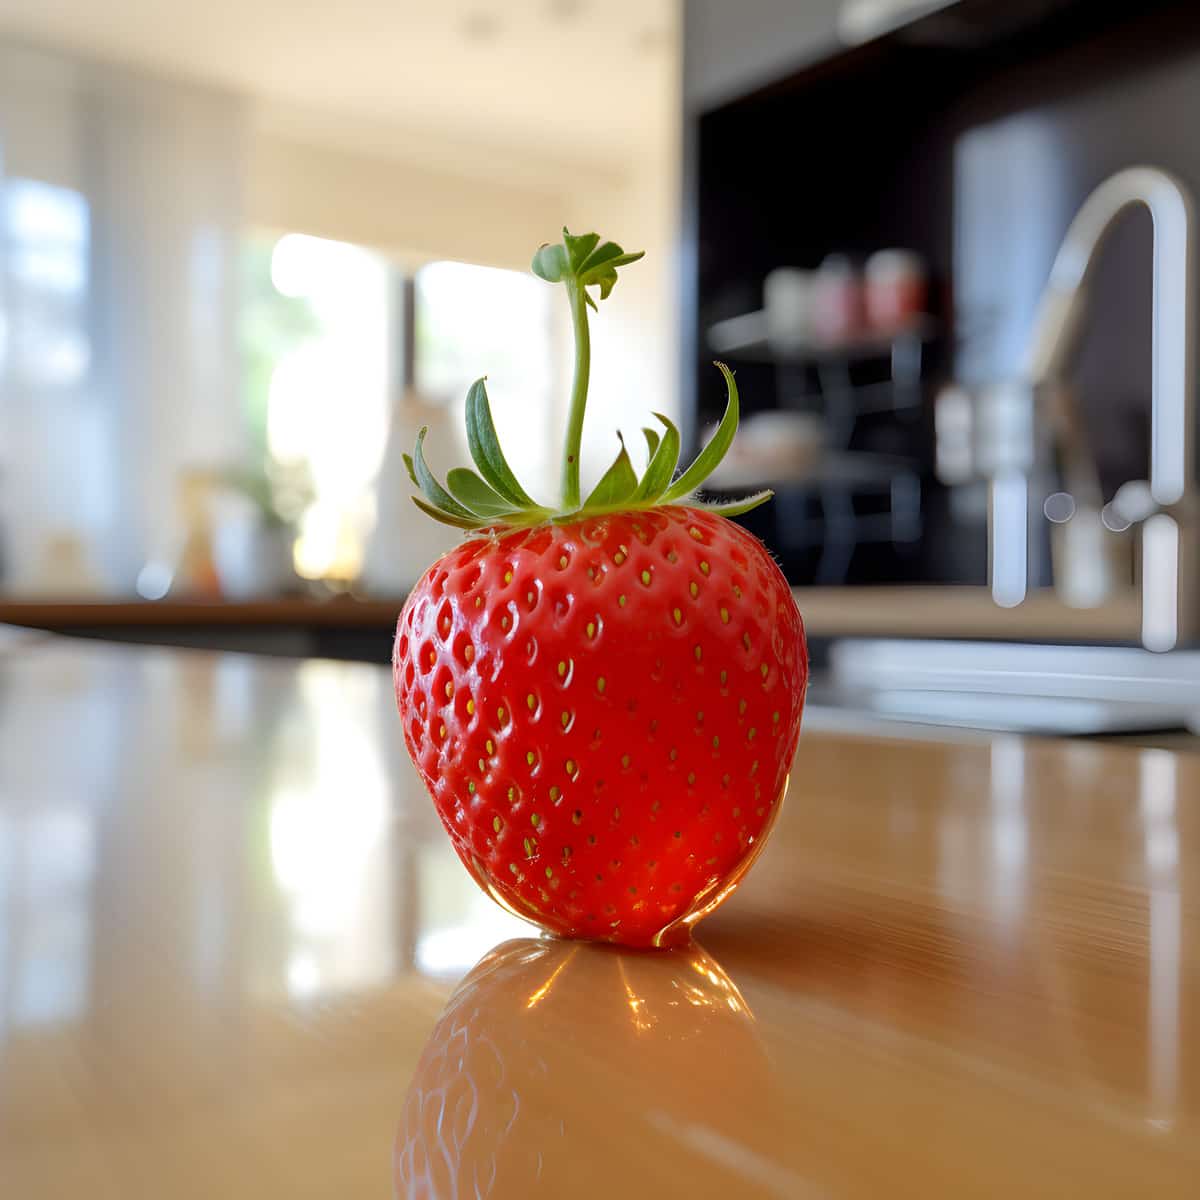 Mock Strawberry on a kitchen counter